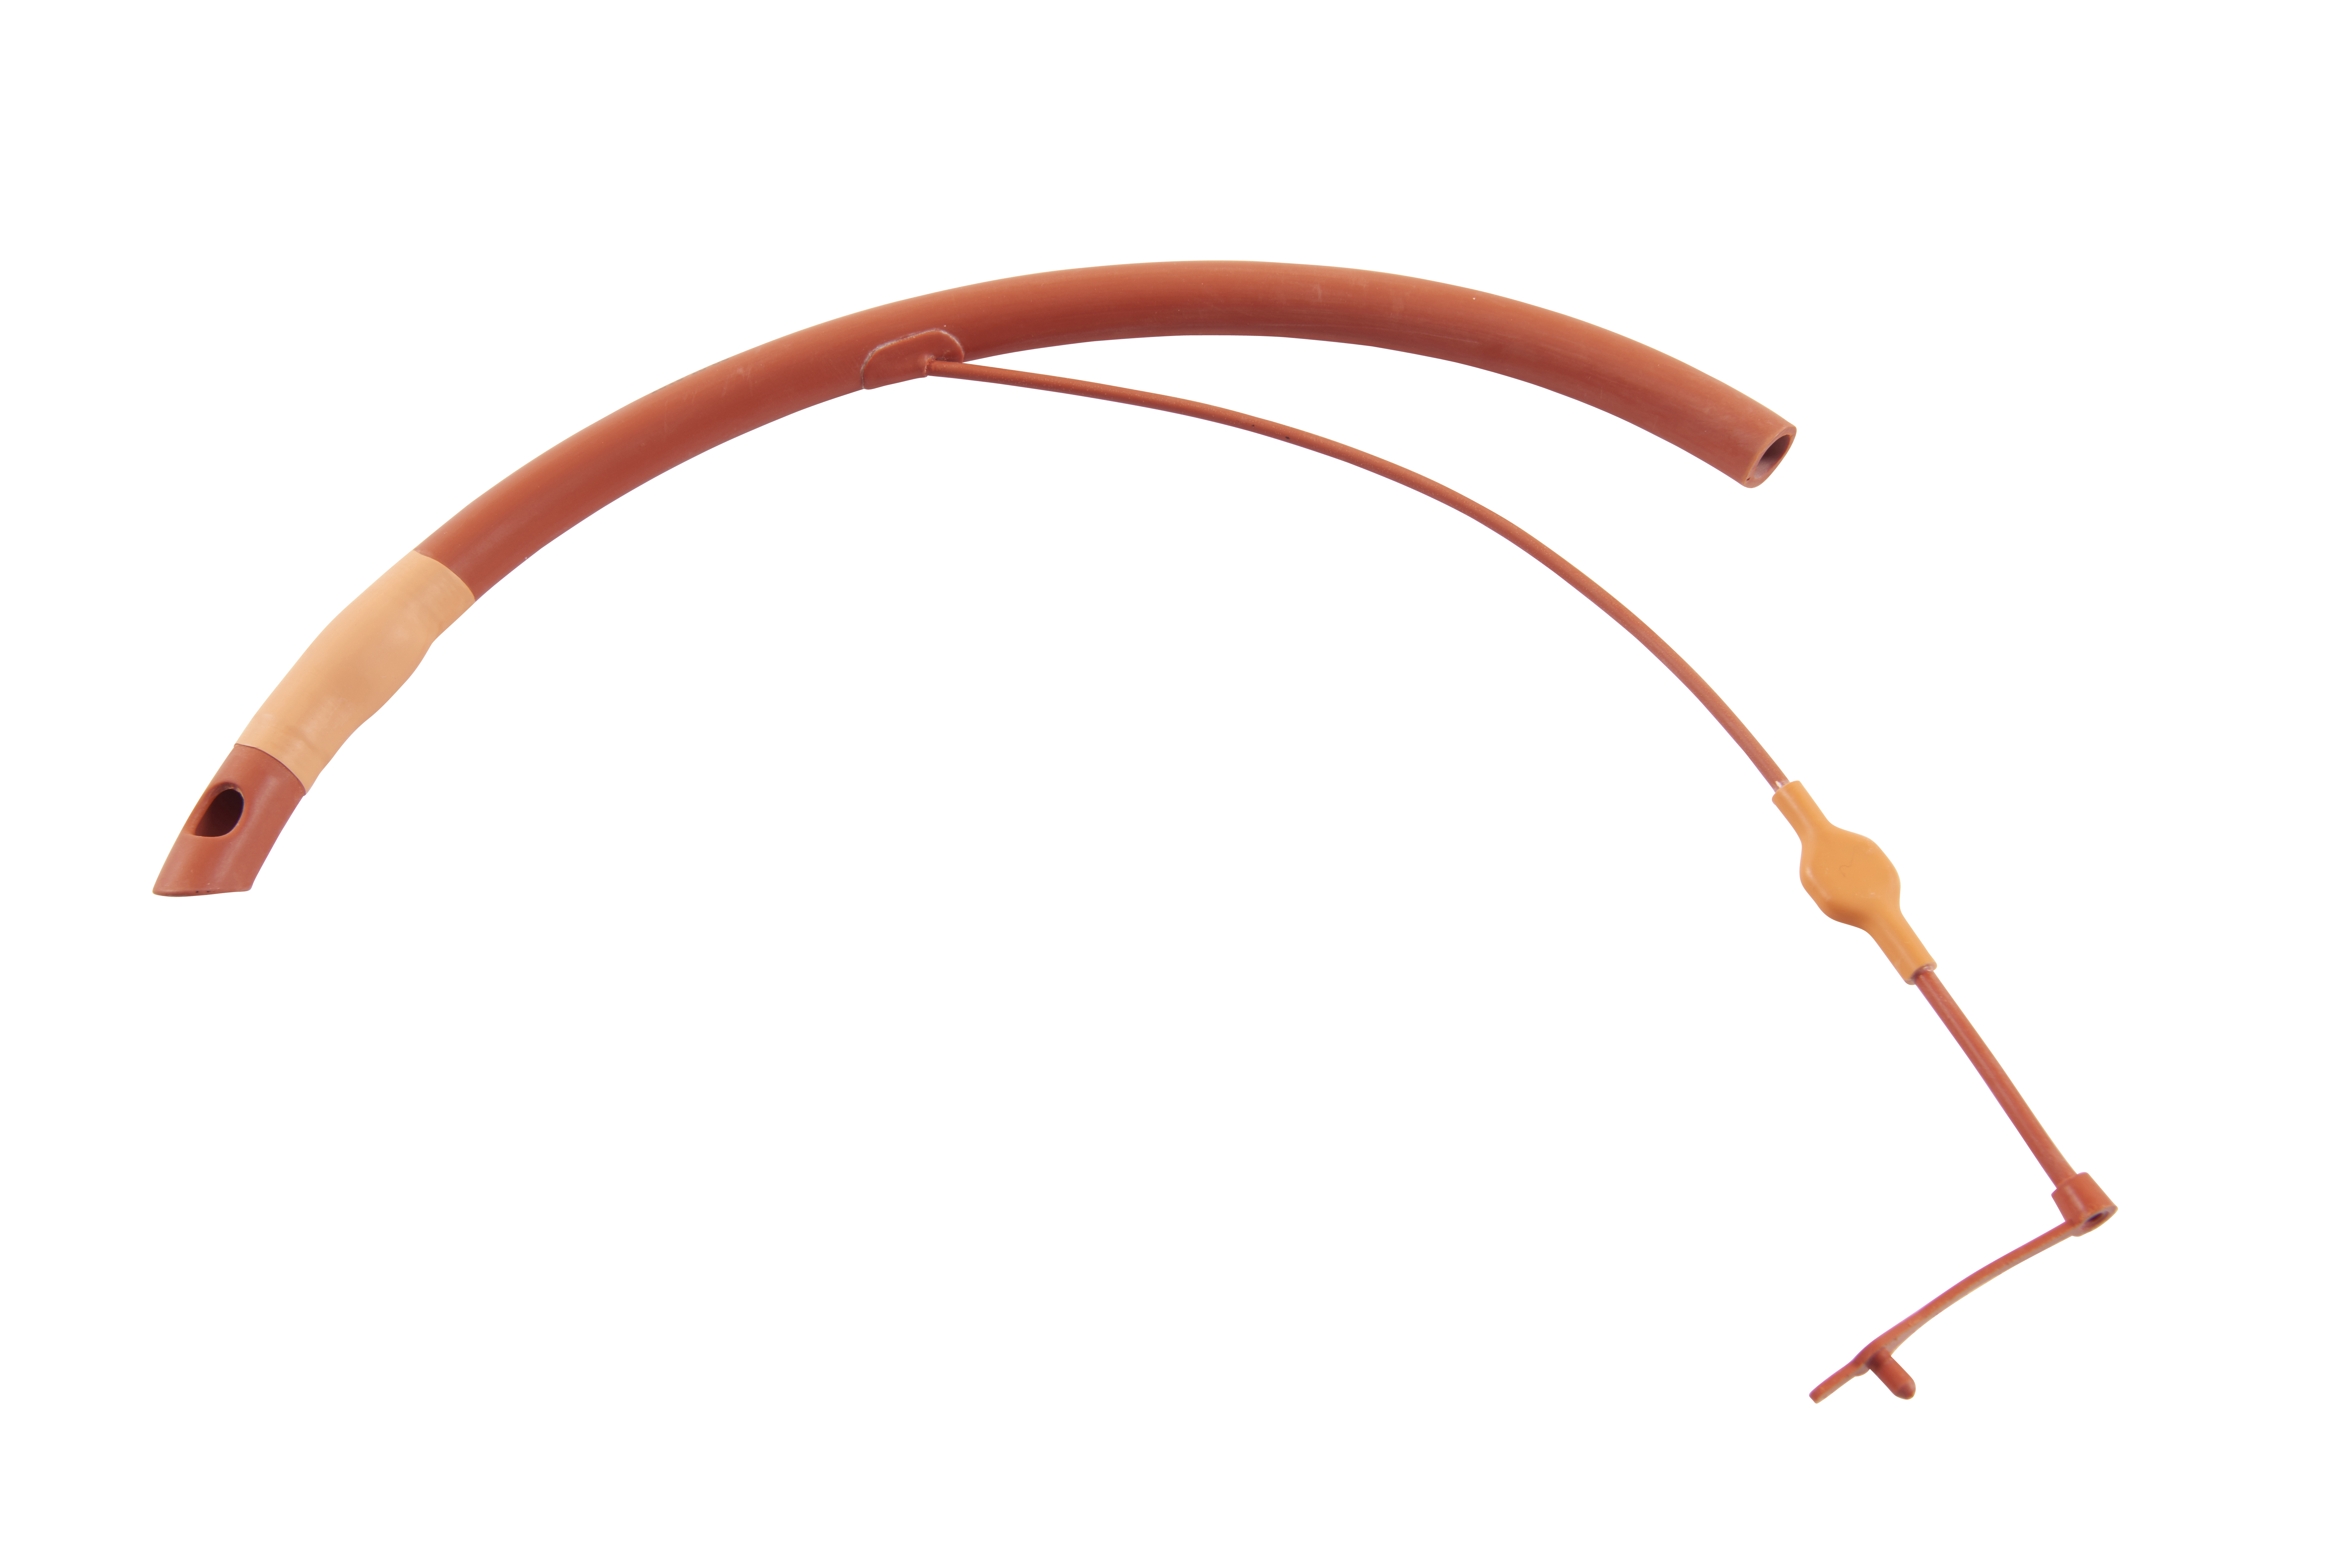 KRUUSE tracheal tube in red rubber w/Murphy eye, 7.5 mm